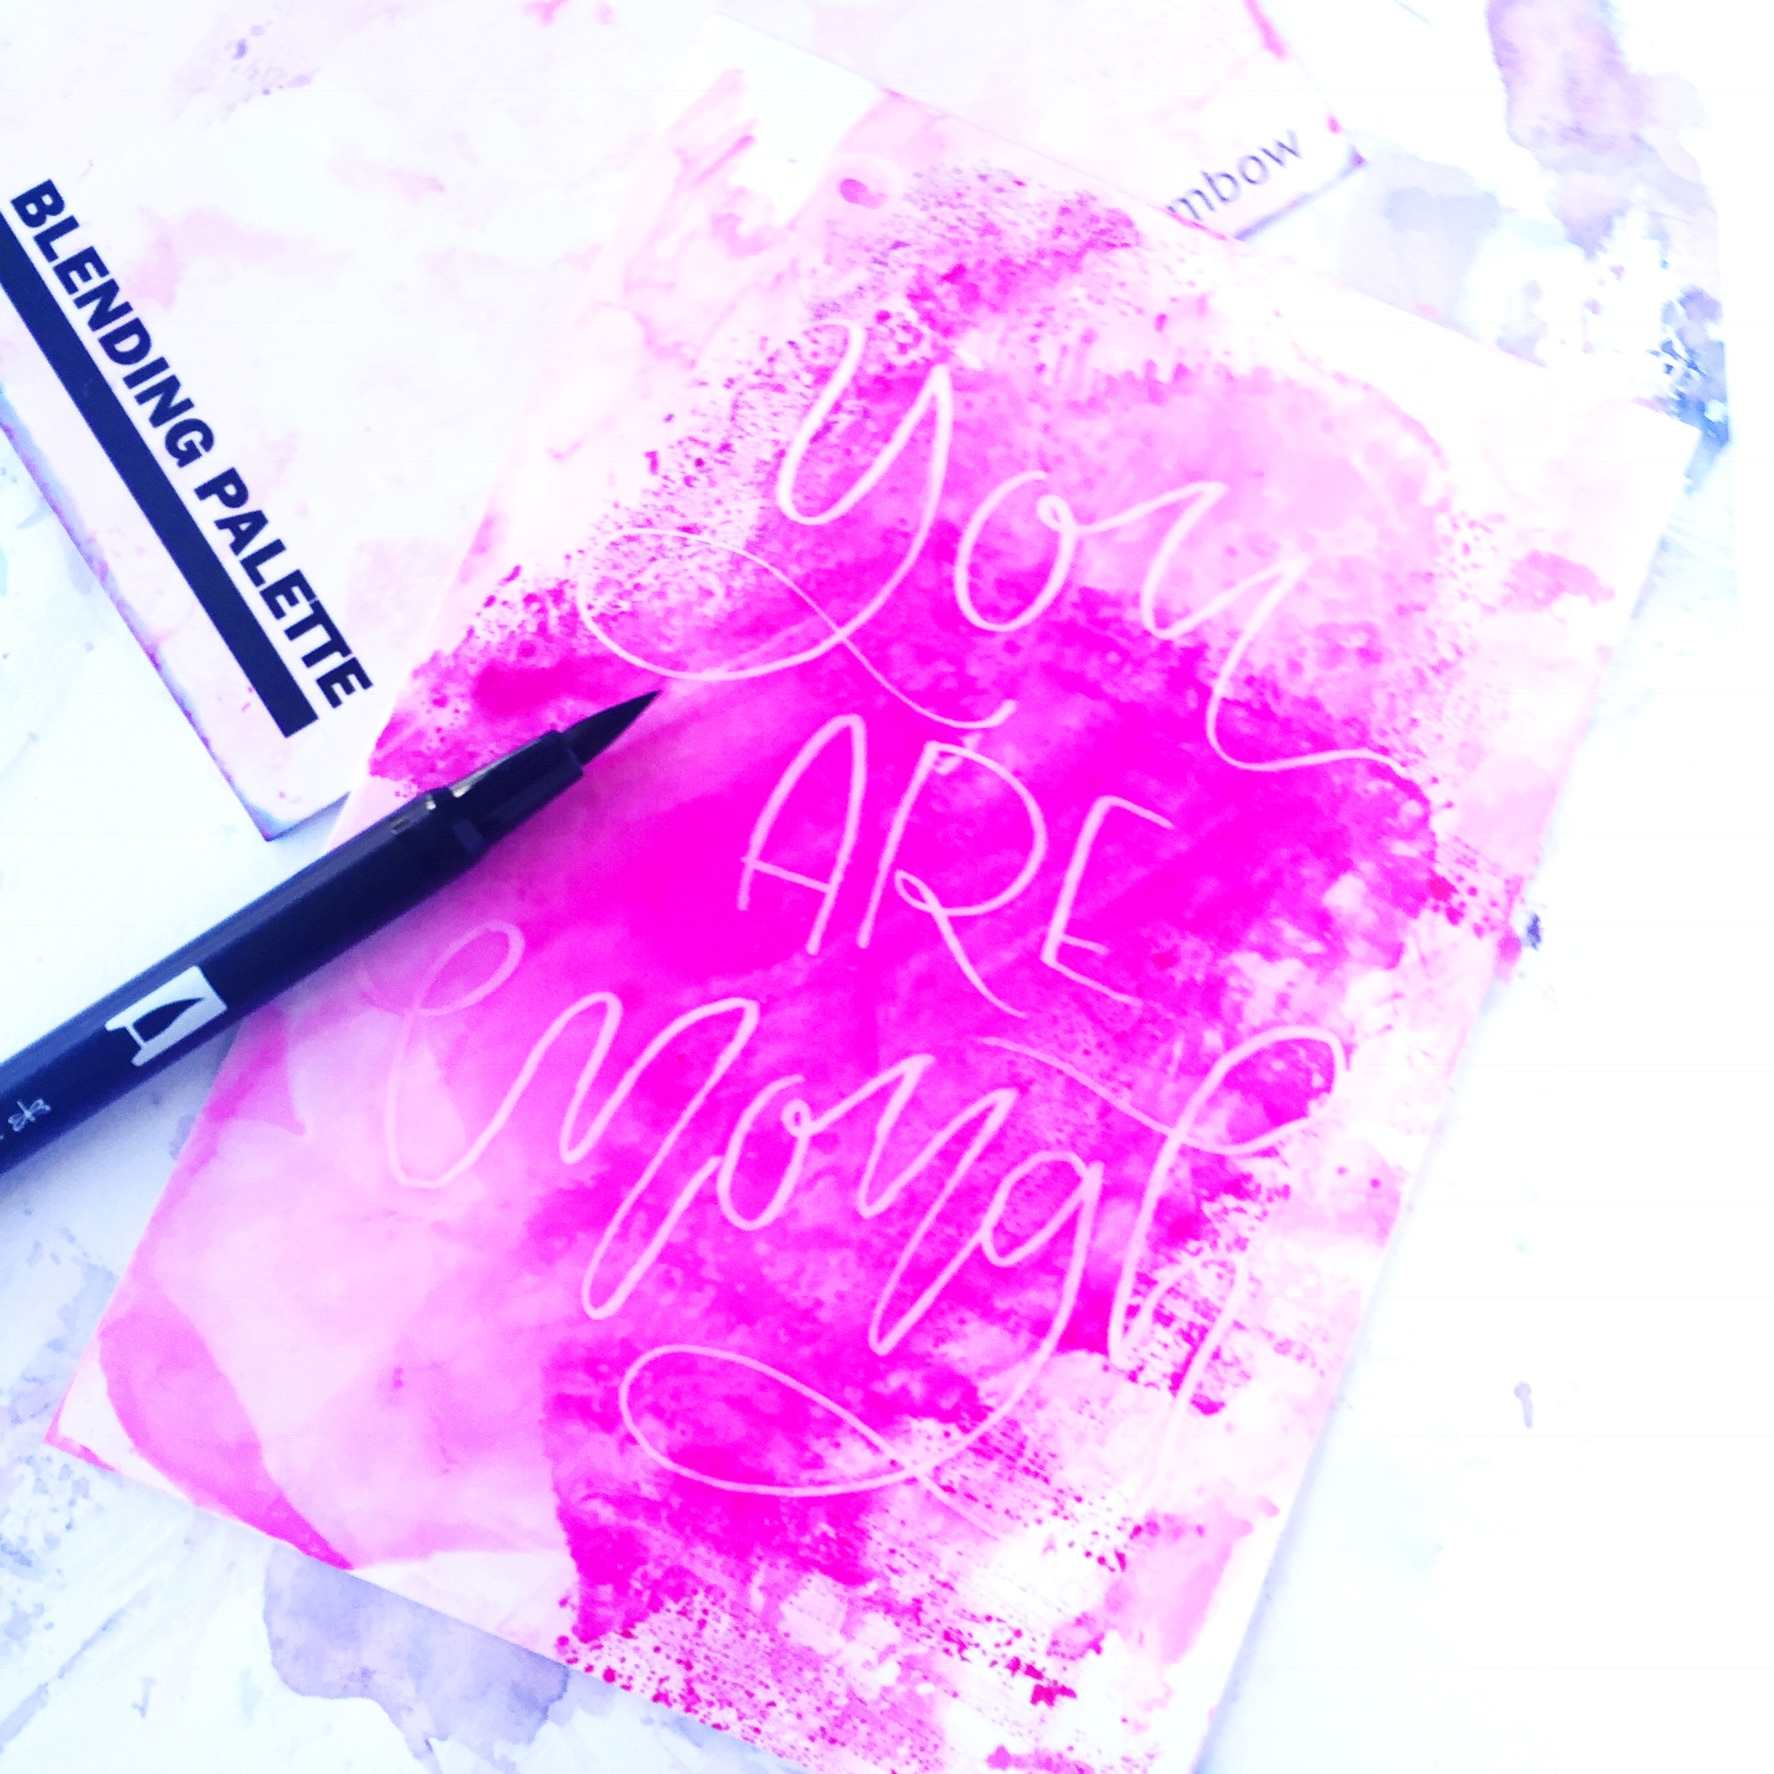 Learn how to use Tombow USA products with ink jet photo paper to create some amazing Watercolor resist designs that are perfectly frame worthy! Lauren of @renmadecalligraphy shows you tips and tricks in this step by step tutorial!